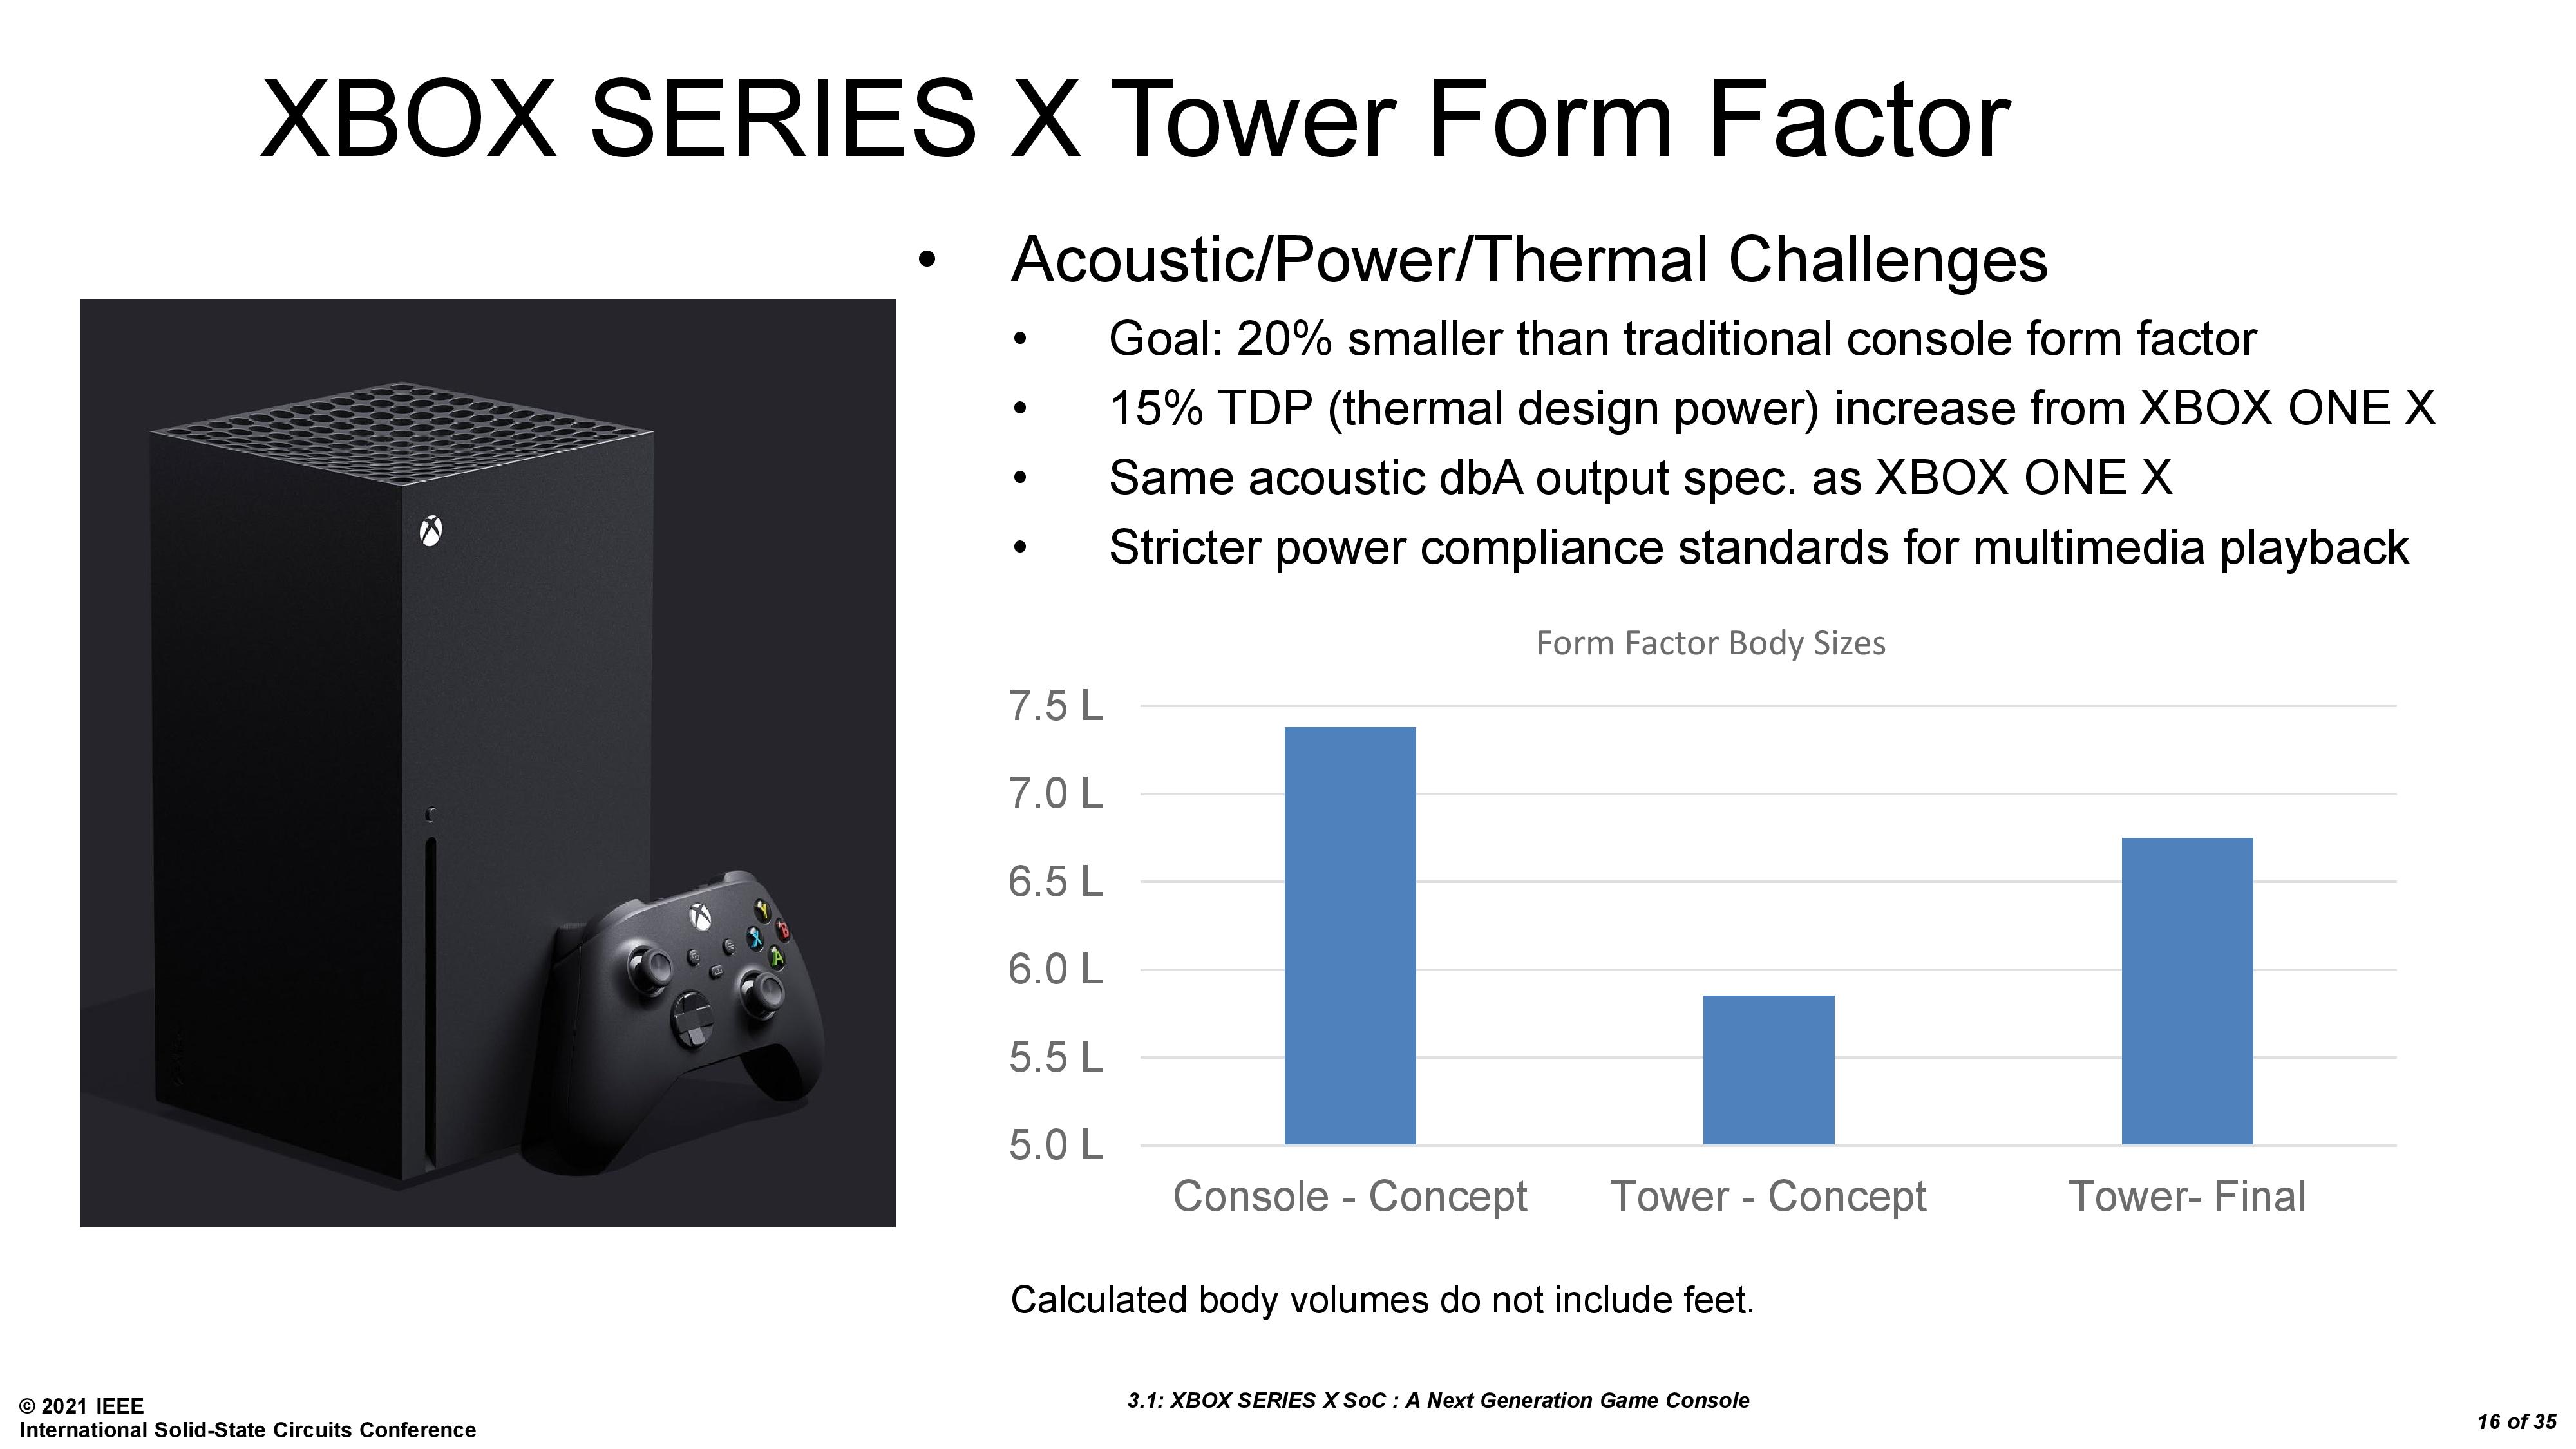 Xbox Series X Gets a Price Hike, But Not in the US (For Now)